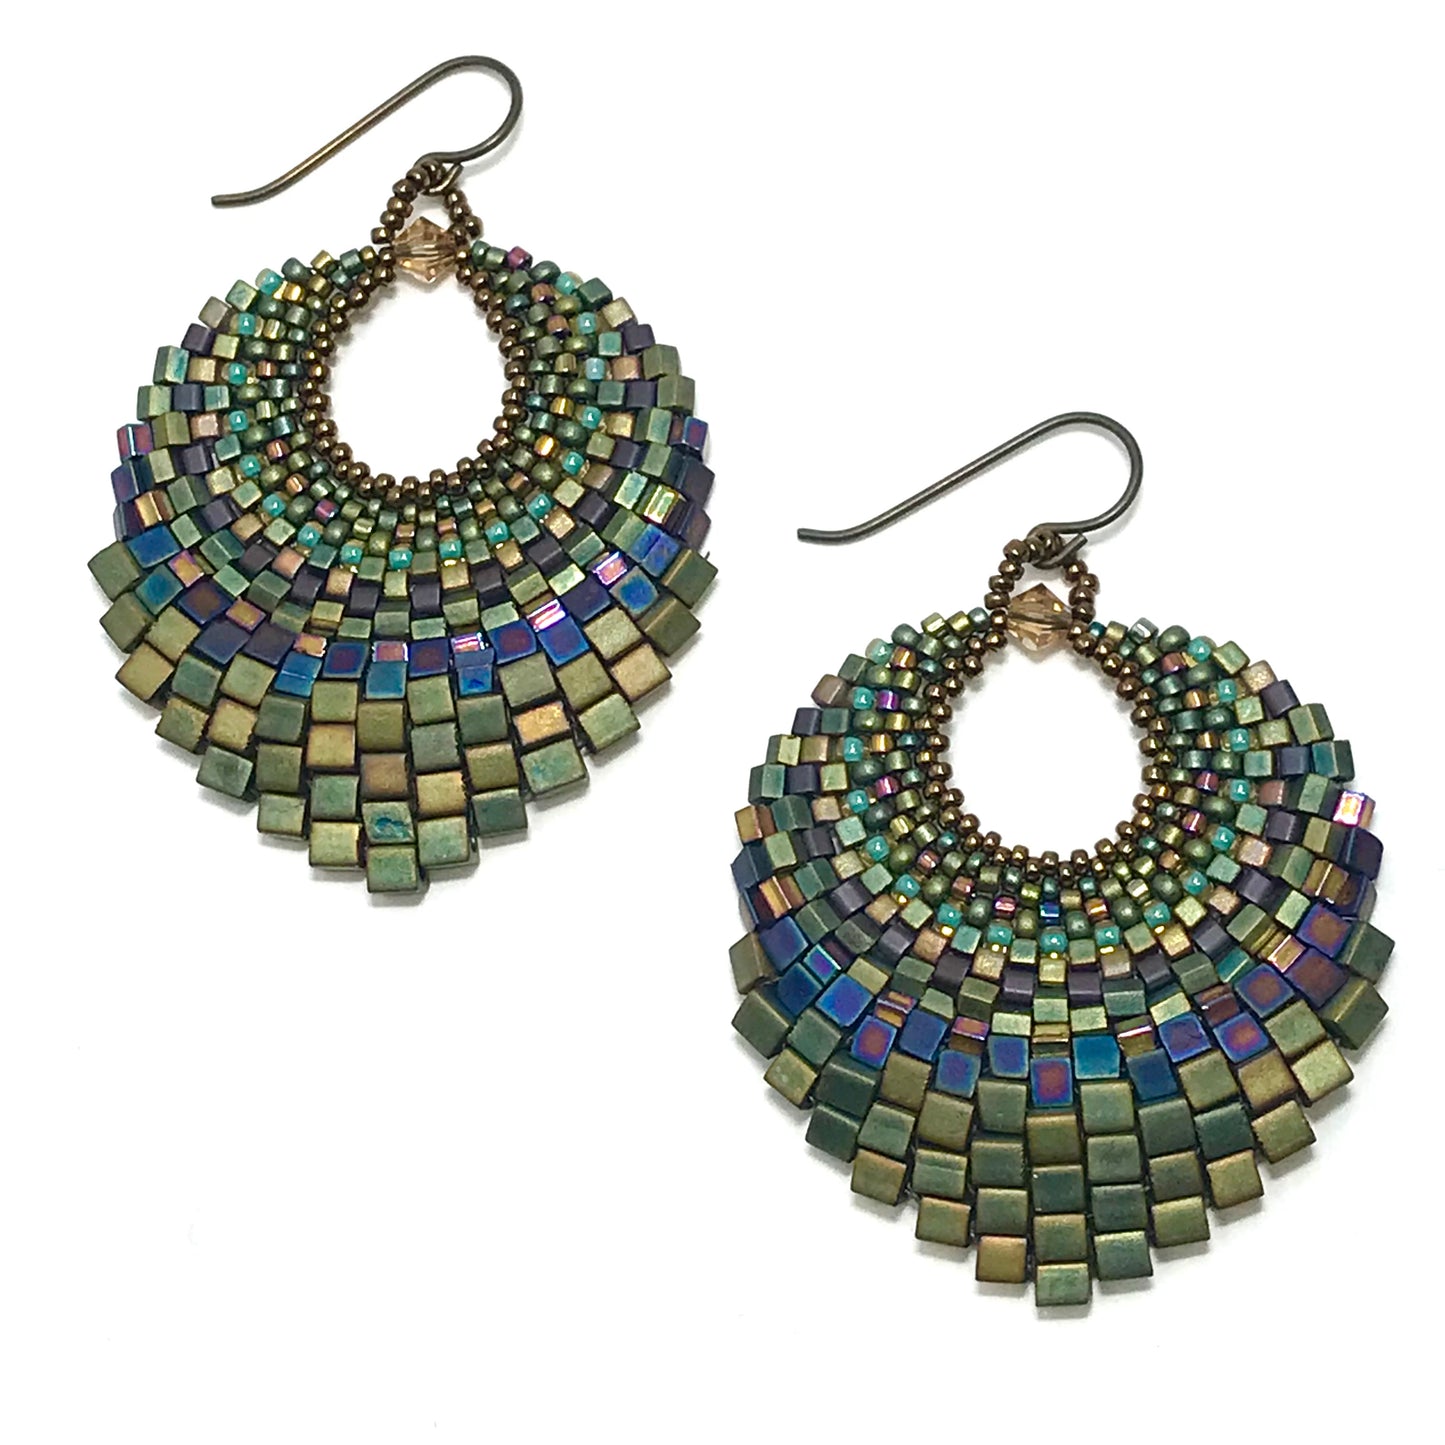 Patina Green Basket Earring - Over the Top